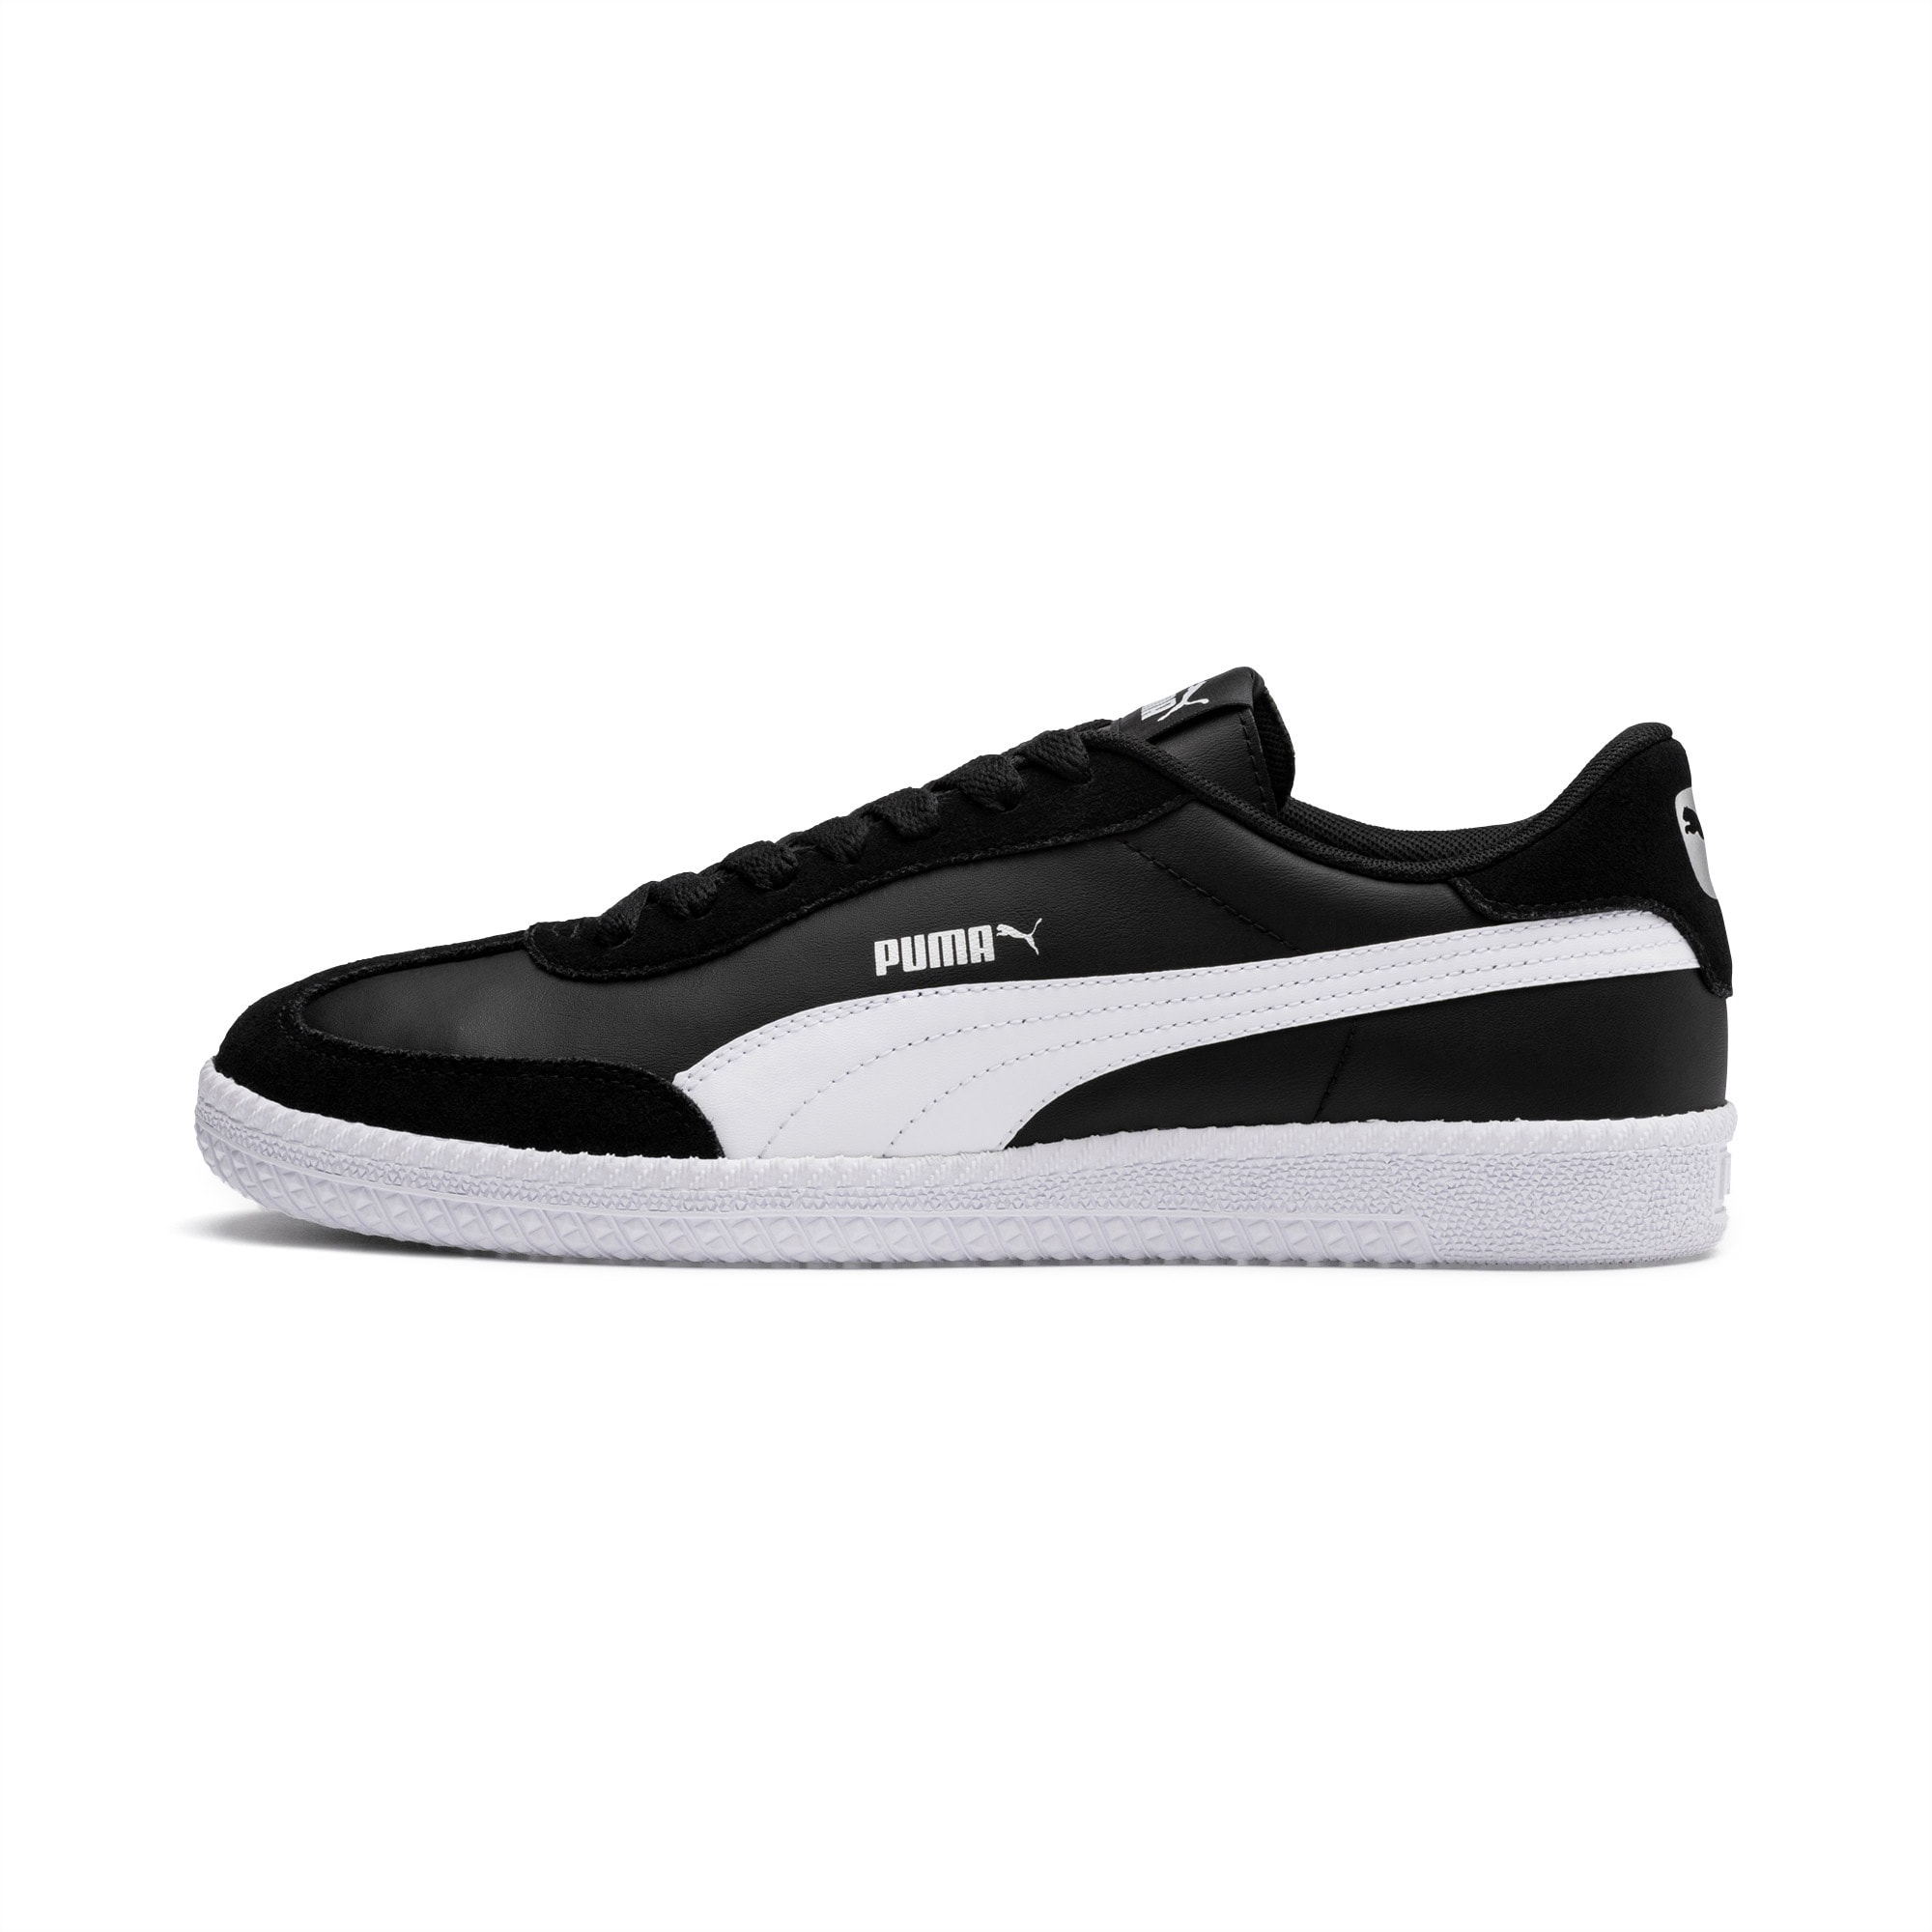 puma men's astro cup leather sneakers